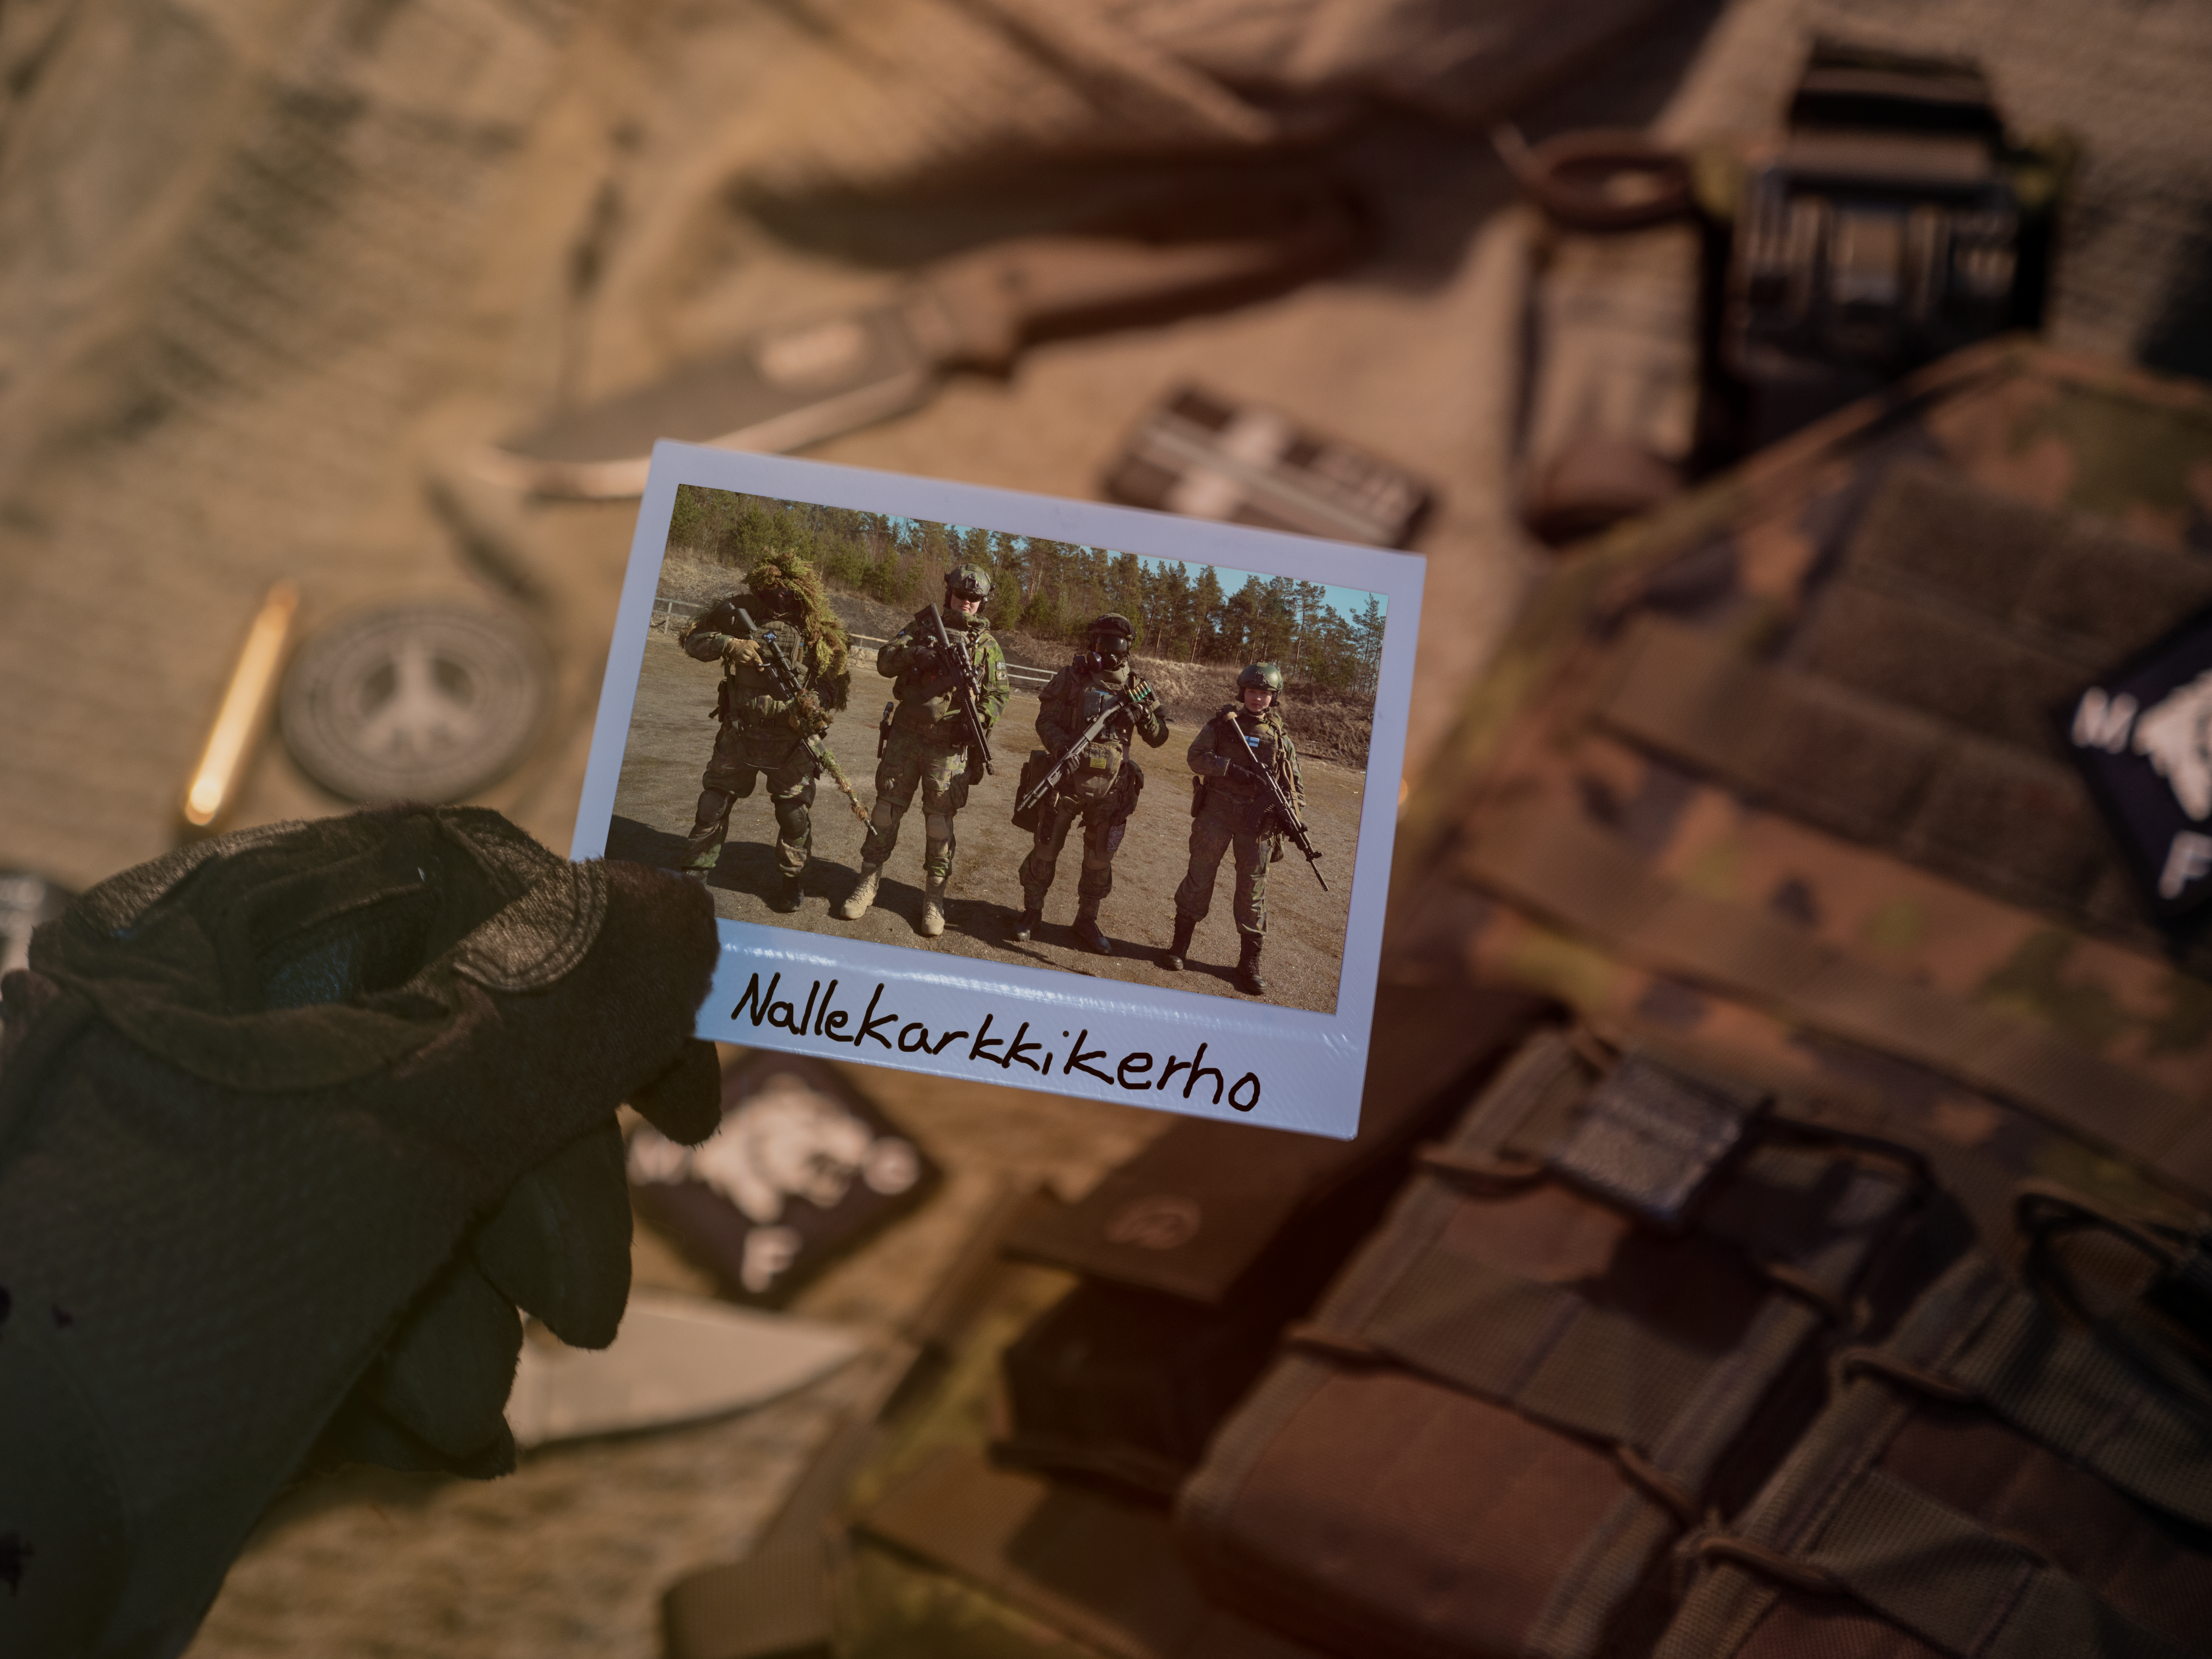 A hand is holding up a polaroid photo of four people in army uniforms.